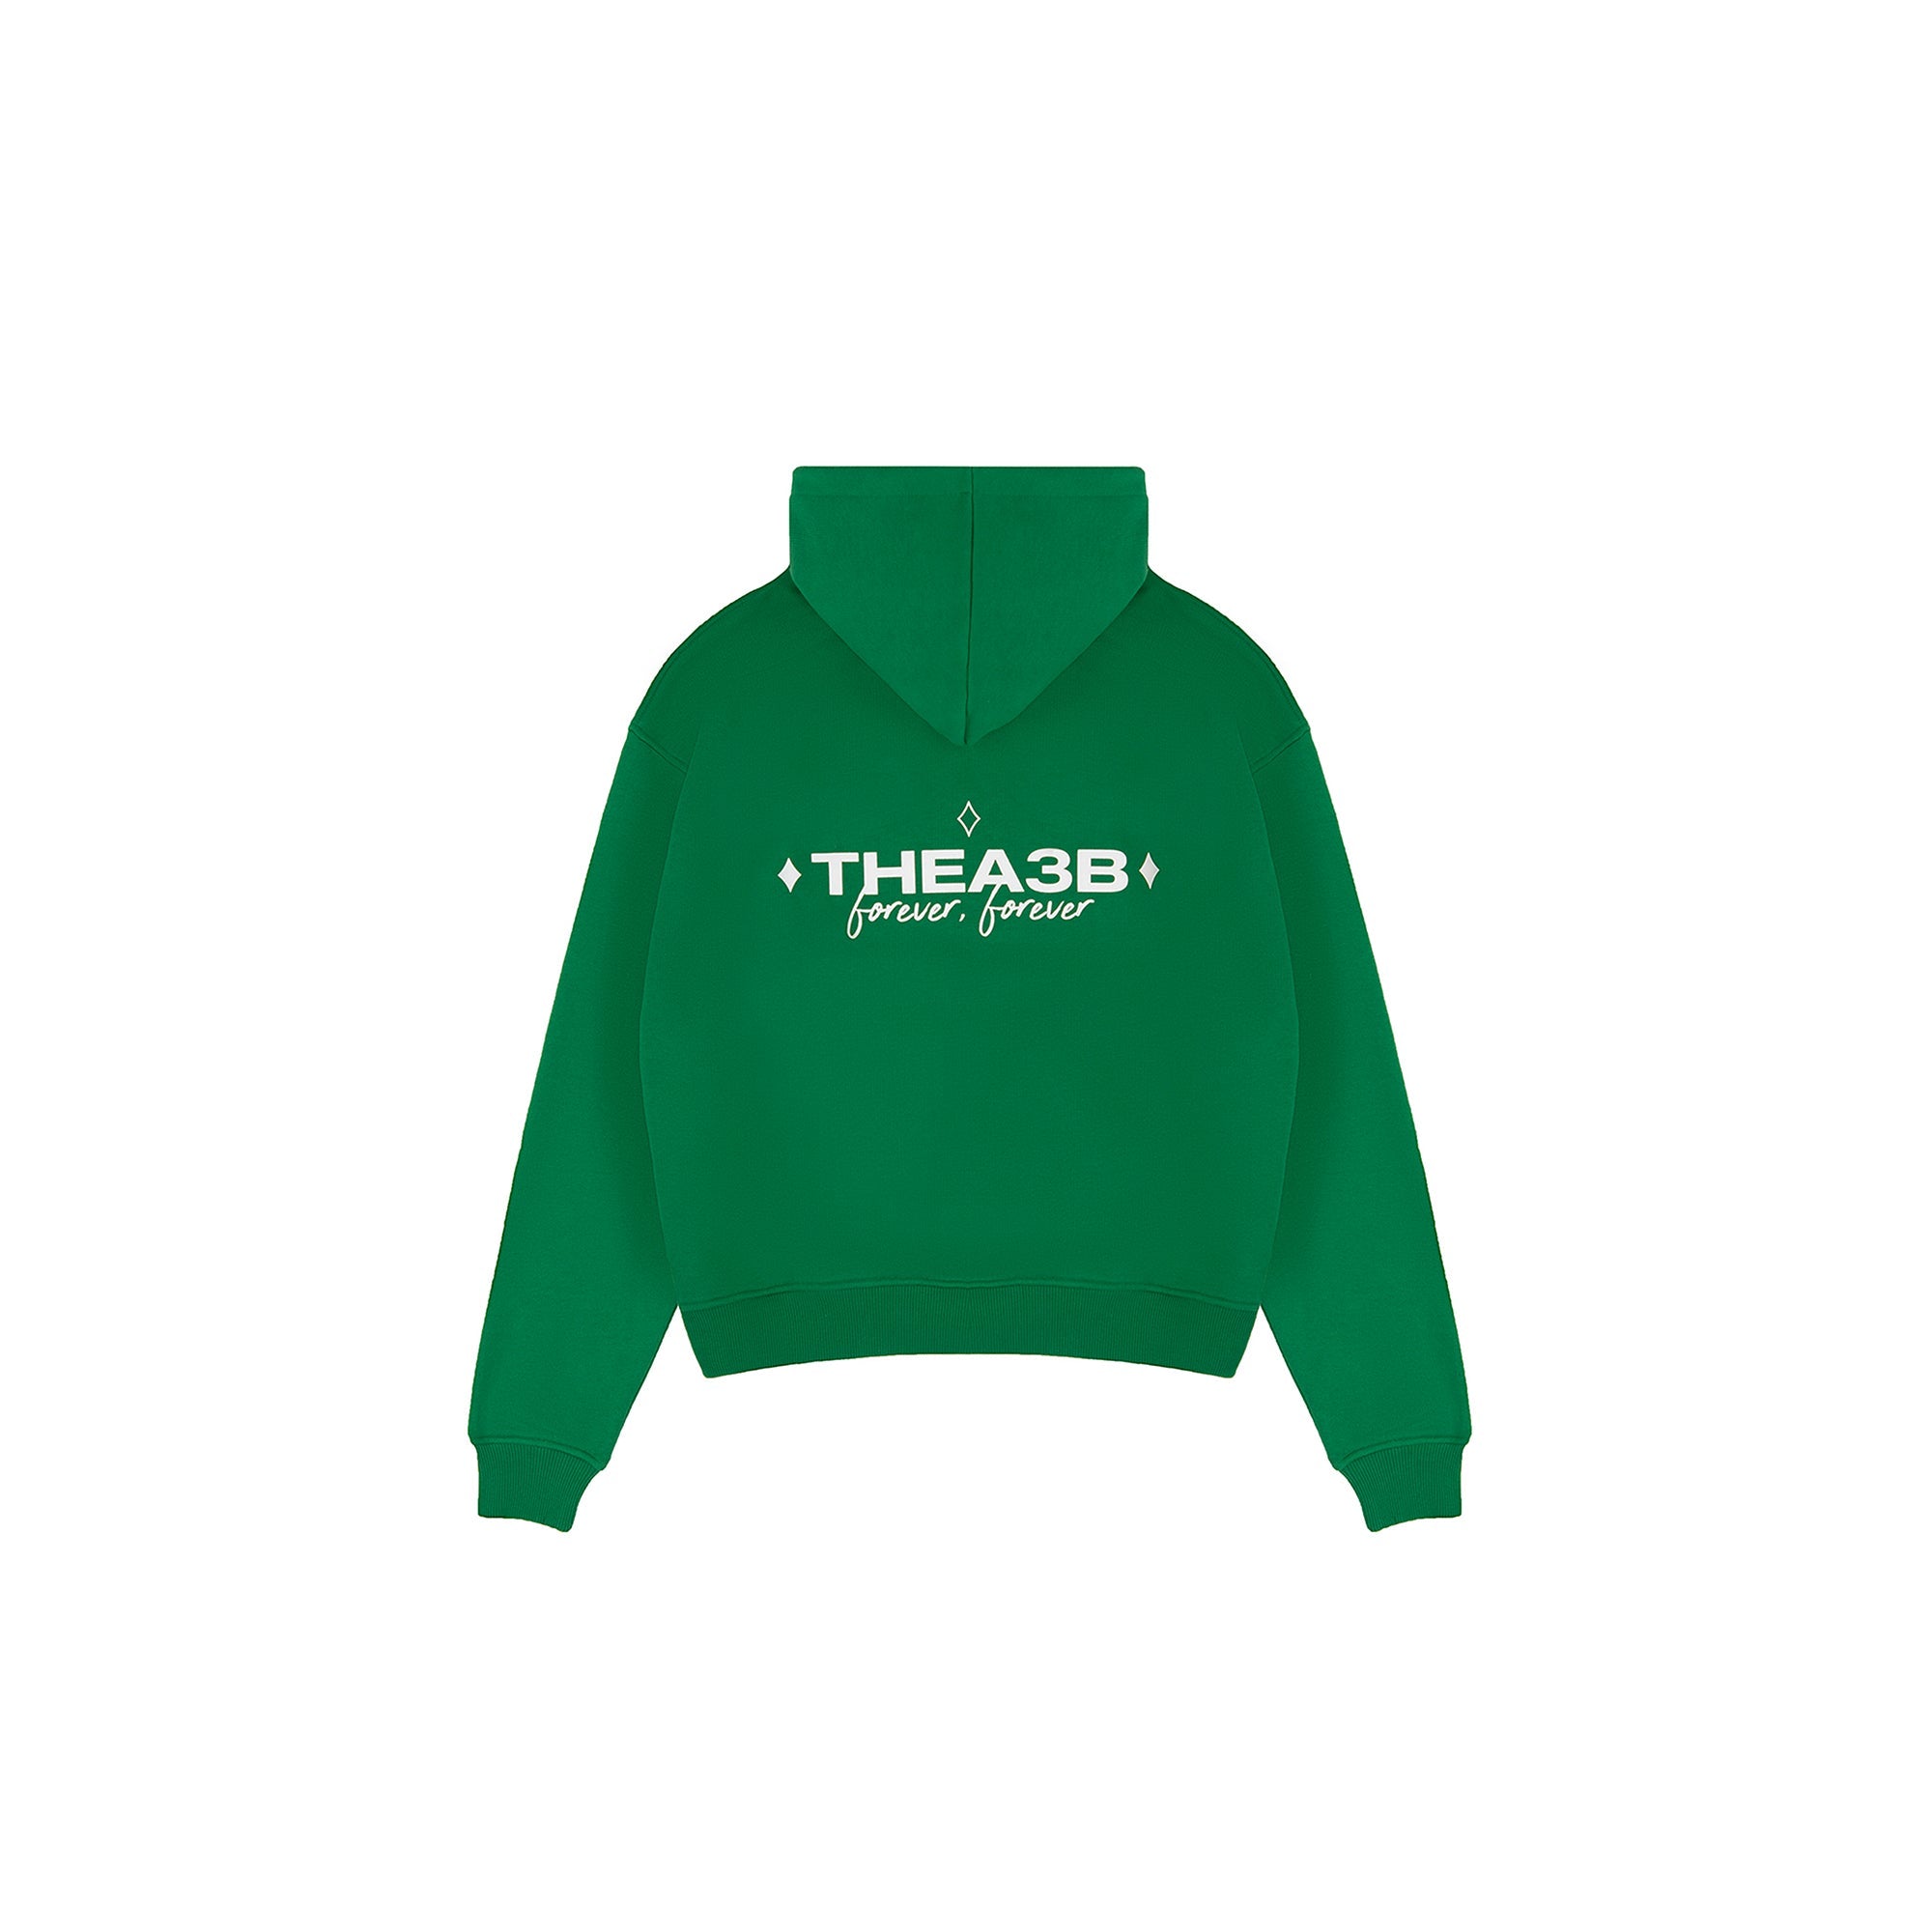 FOREVER, FOREVER HOODIE - GREEN - A3B